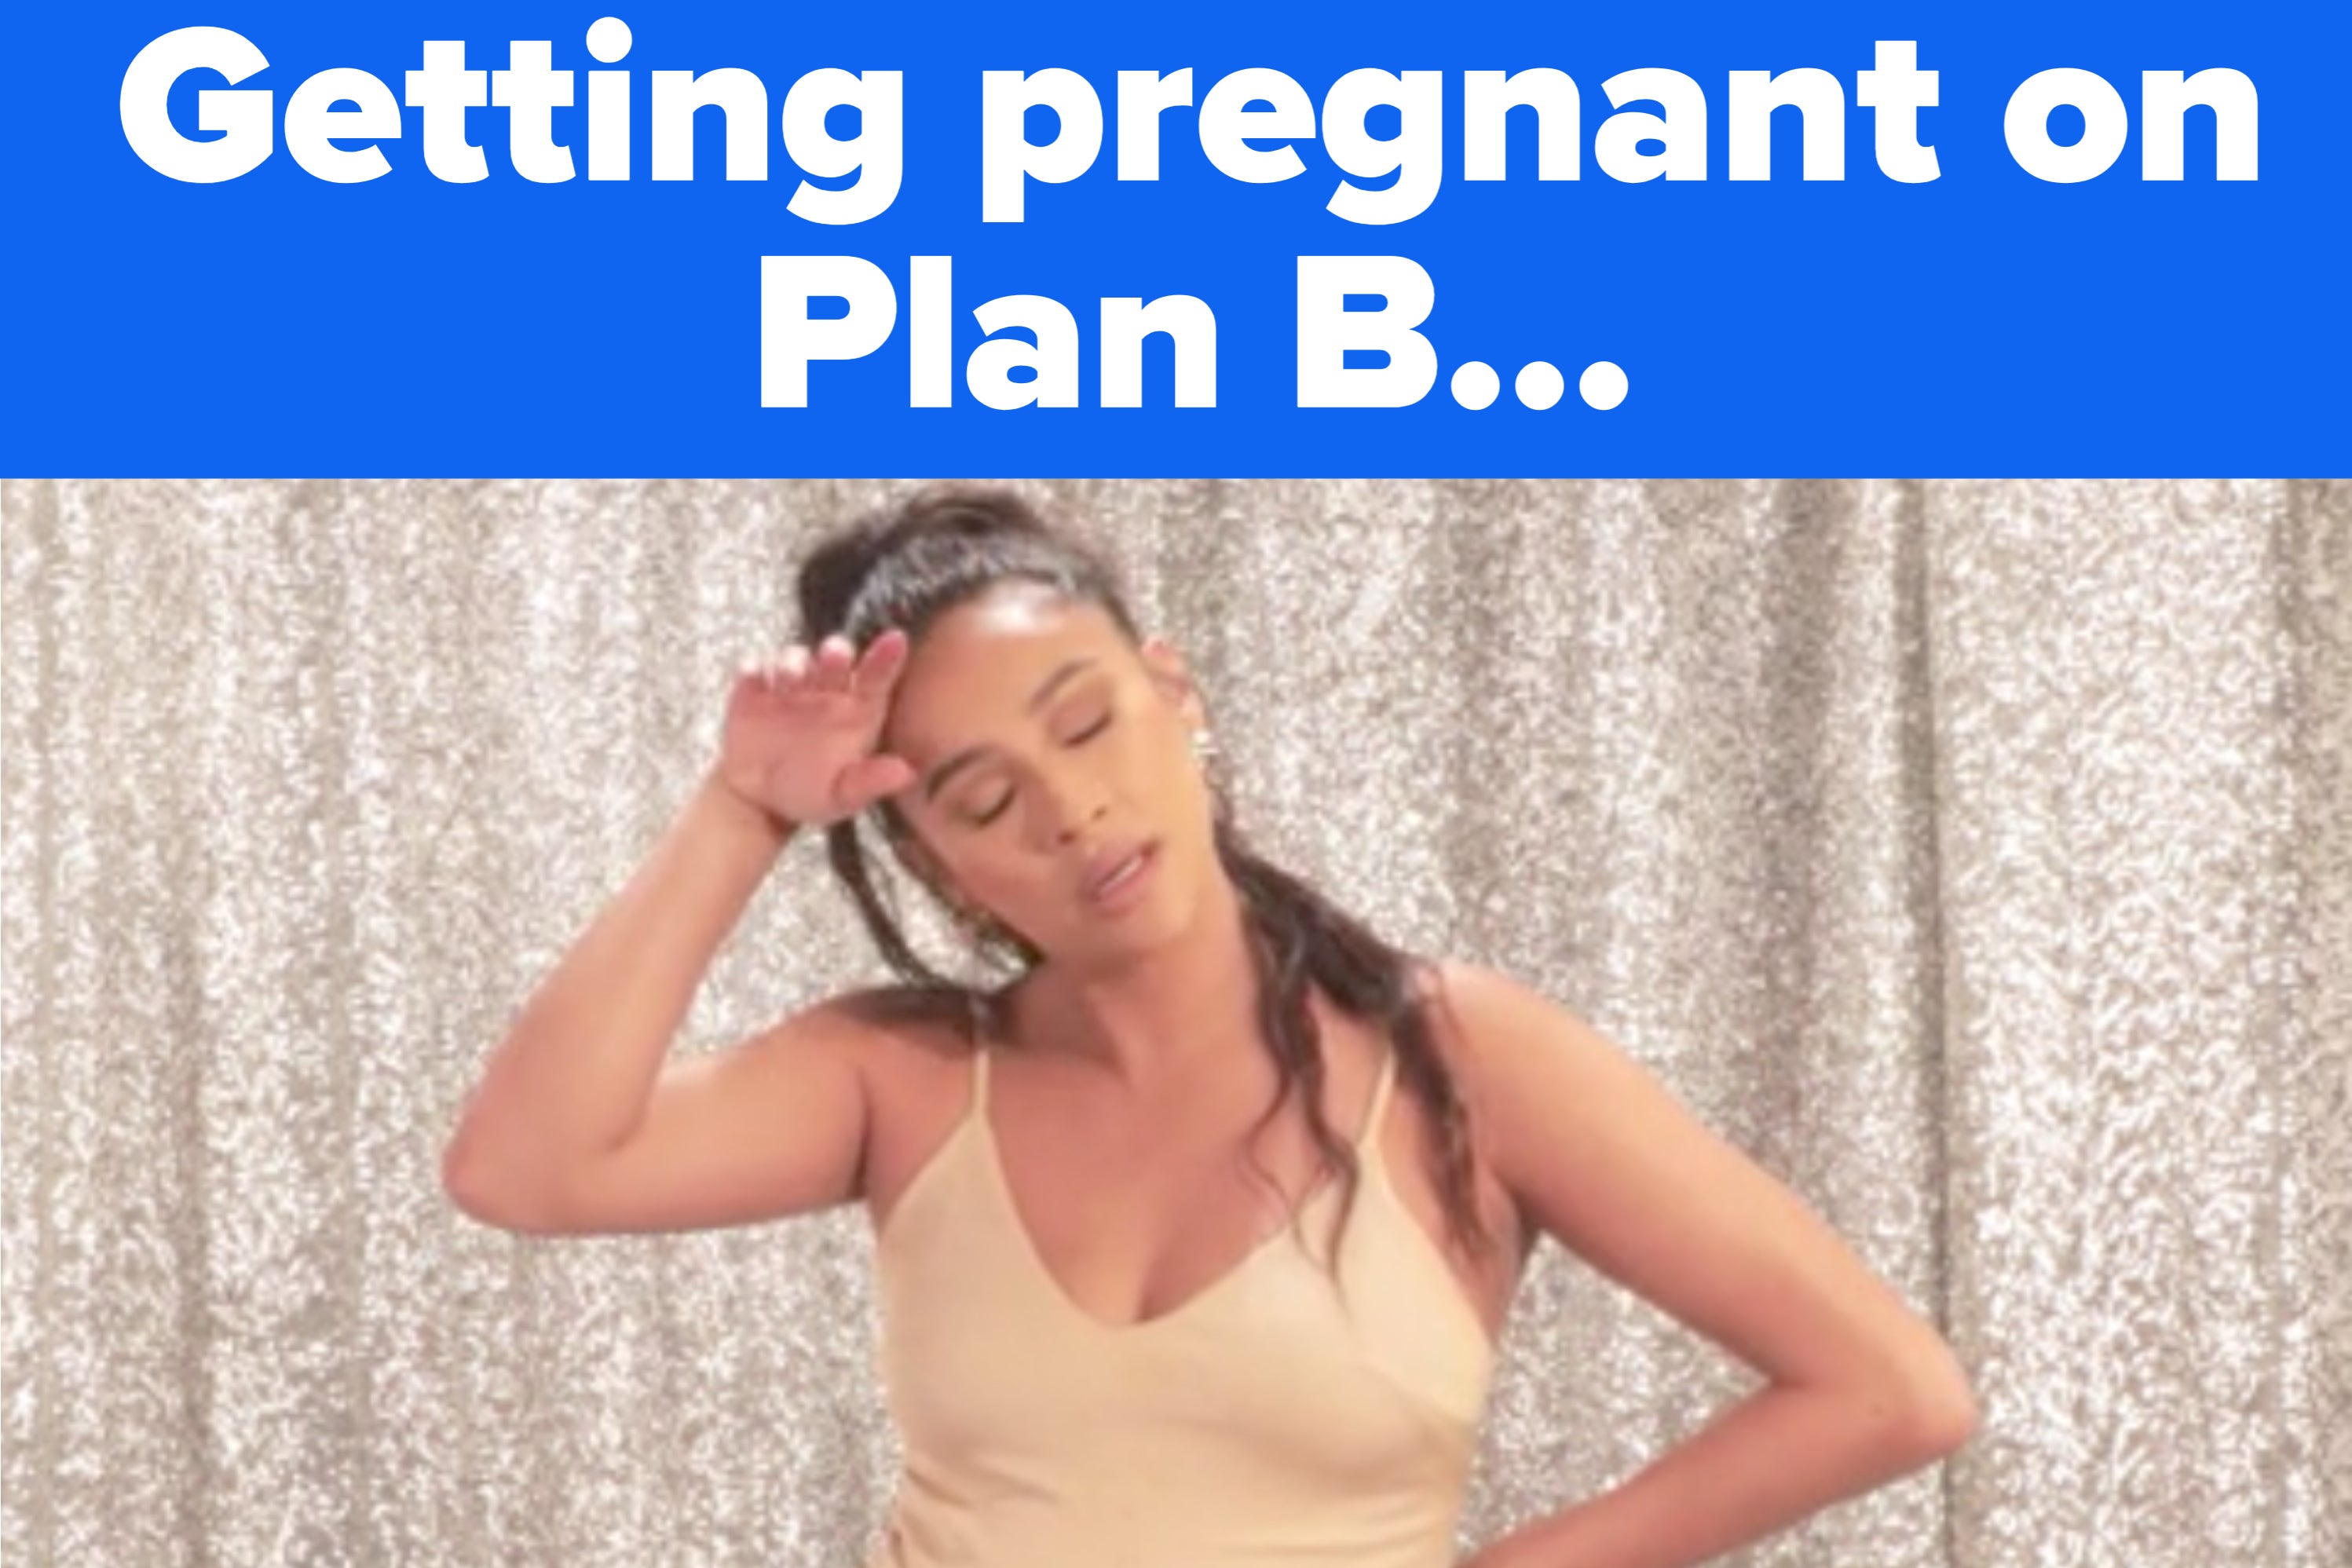 TikTokers Are Sharing Their Stories About Getting Pregnant After Taking The Morning After Pill, So We Had An Expert Weigh In thumbnail